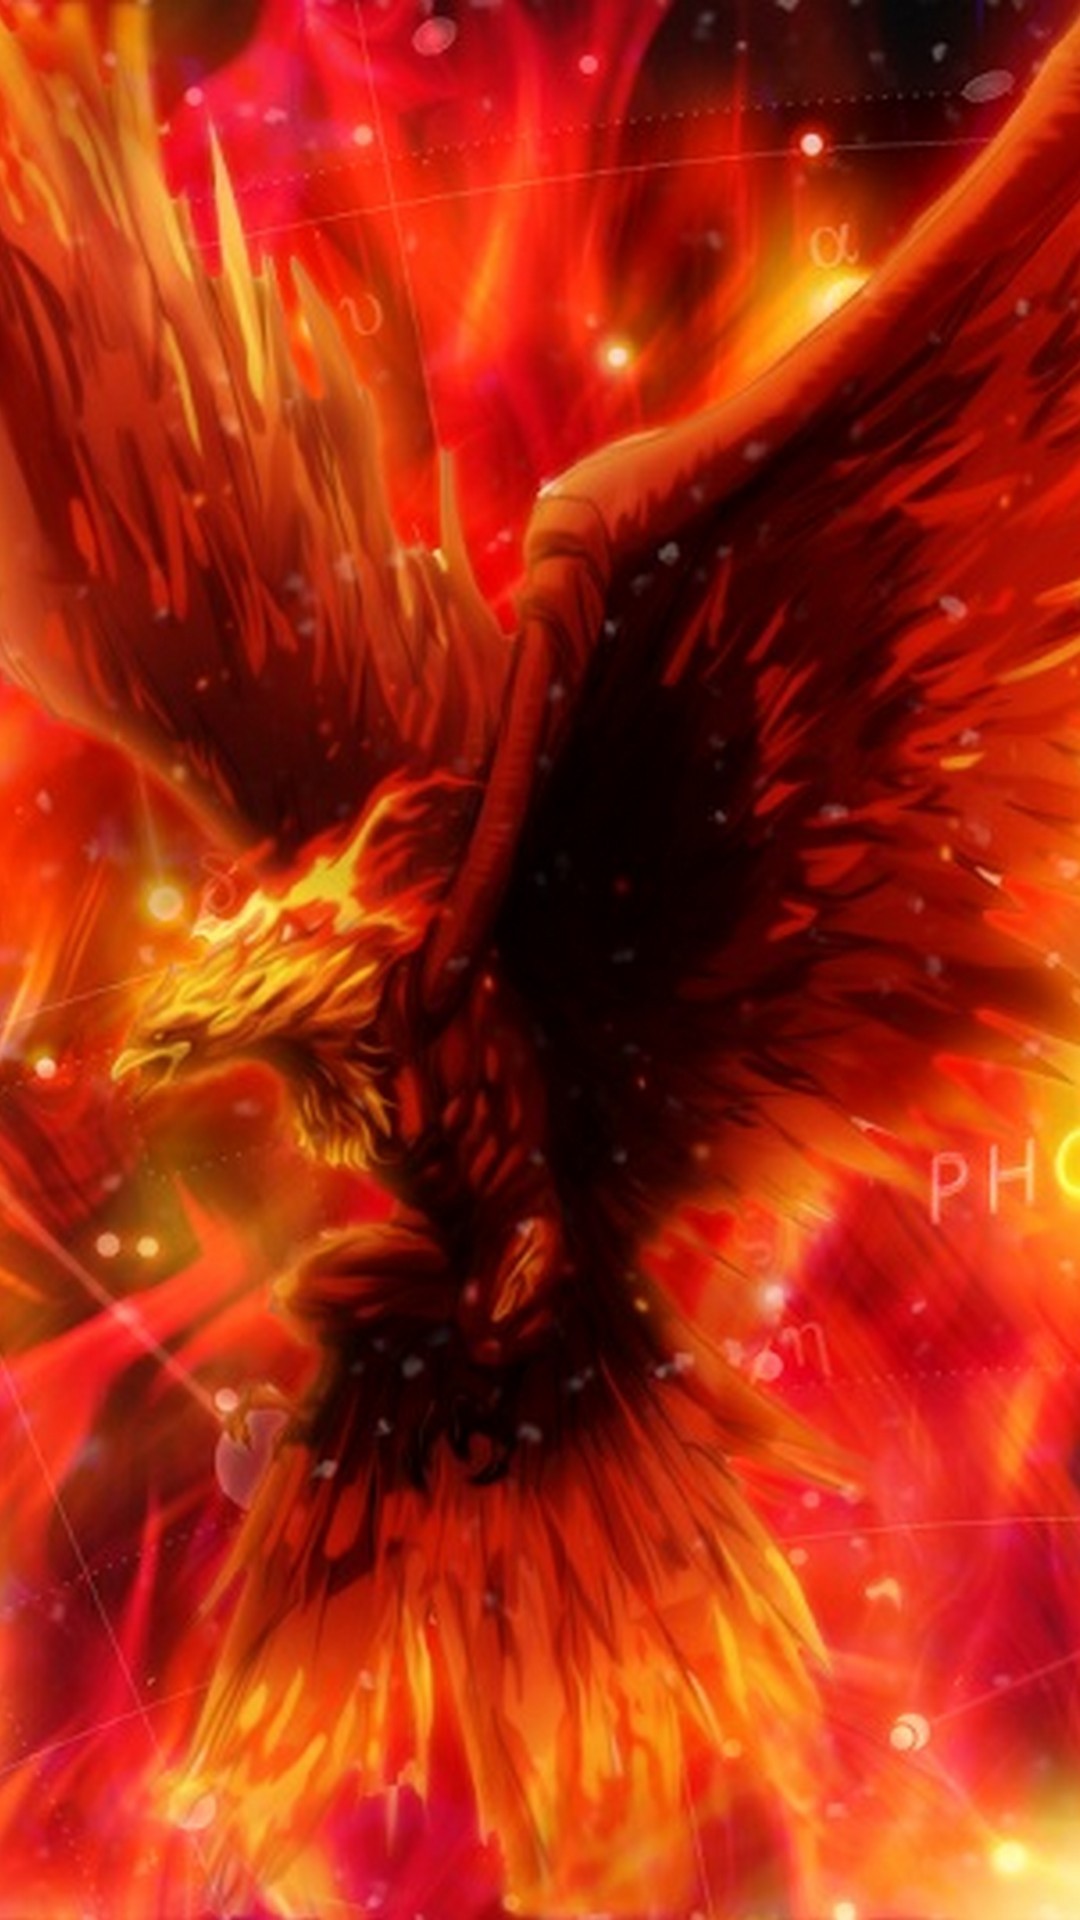 1080x1920 Wallpaper iPhone Phoenix Bird Images with image resolution  pixel.  You can make this wallpaper